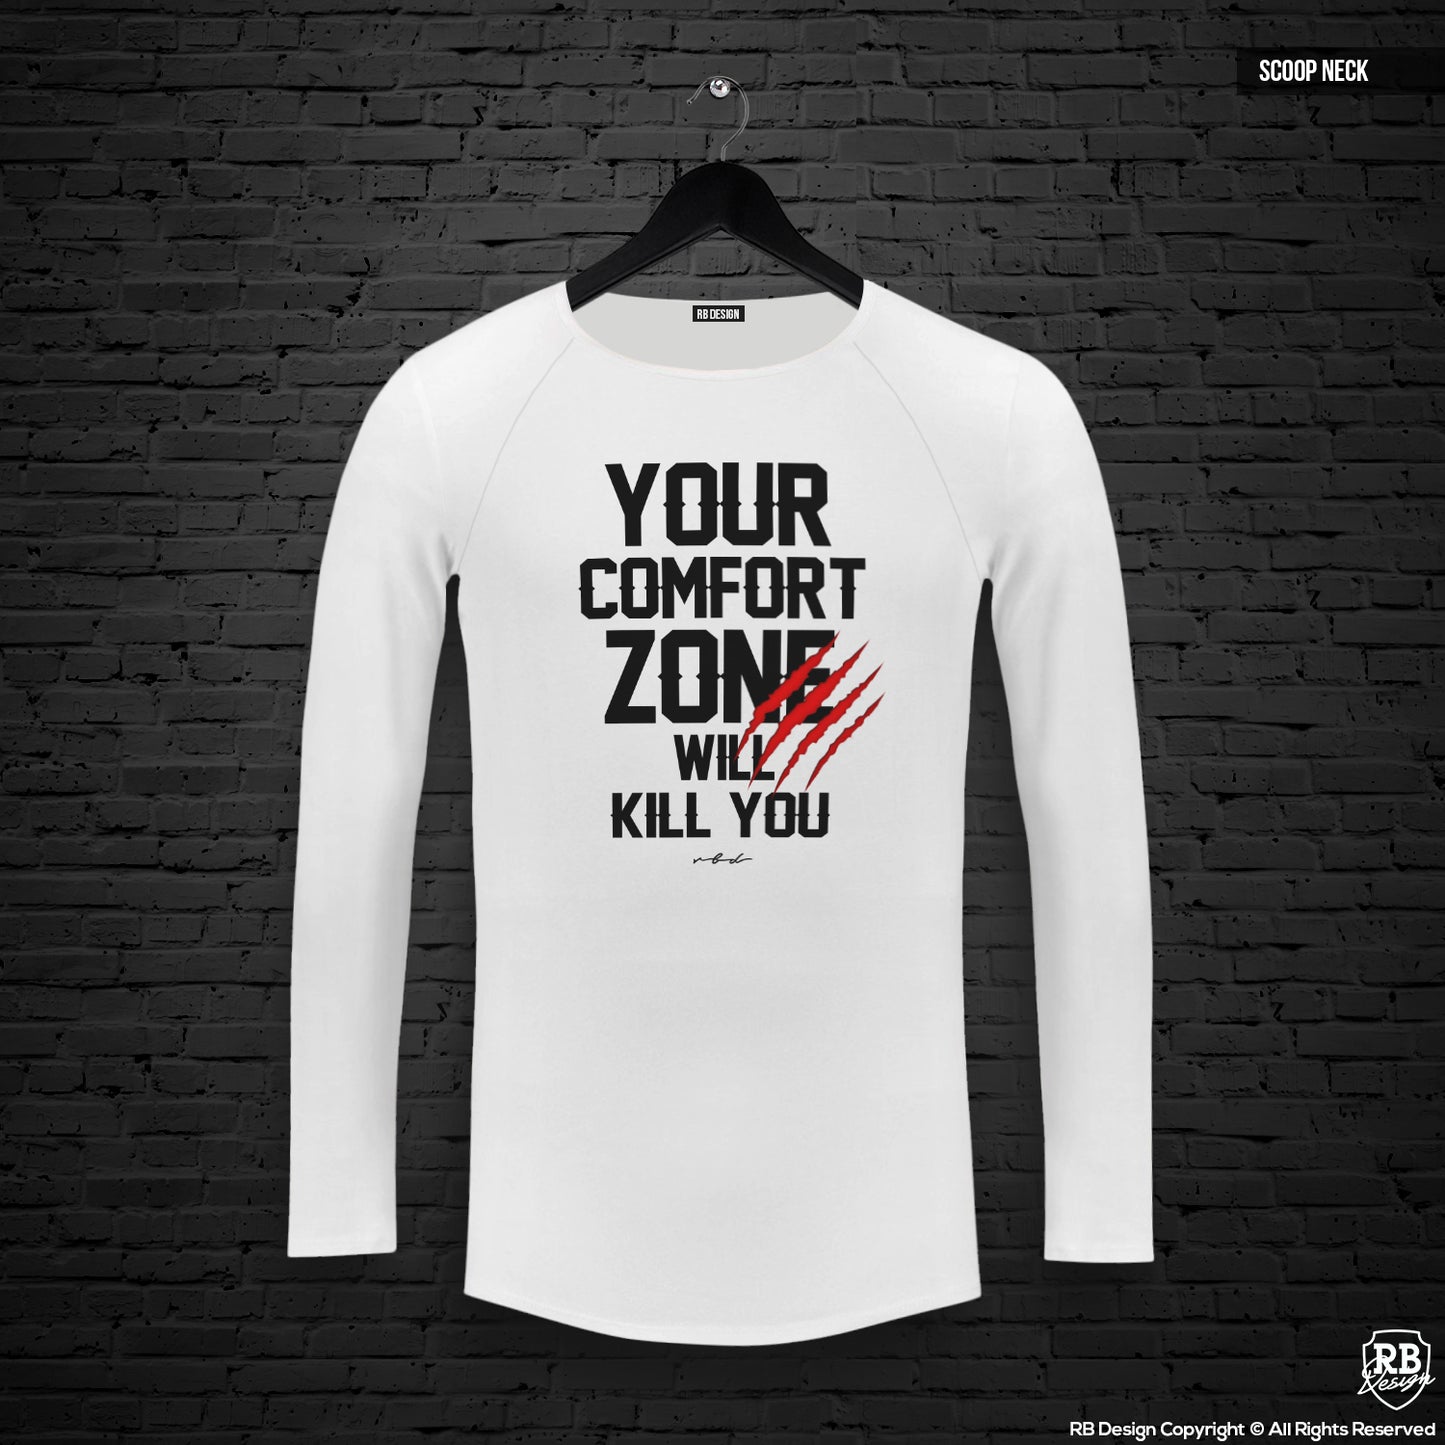 Mens Long Sleeve T-shirt "Comfort Zone Will Kill You" MD979